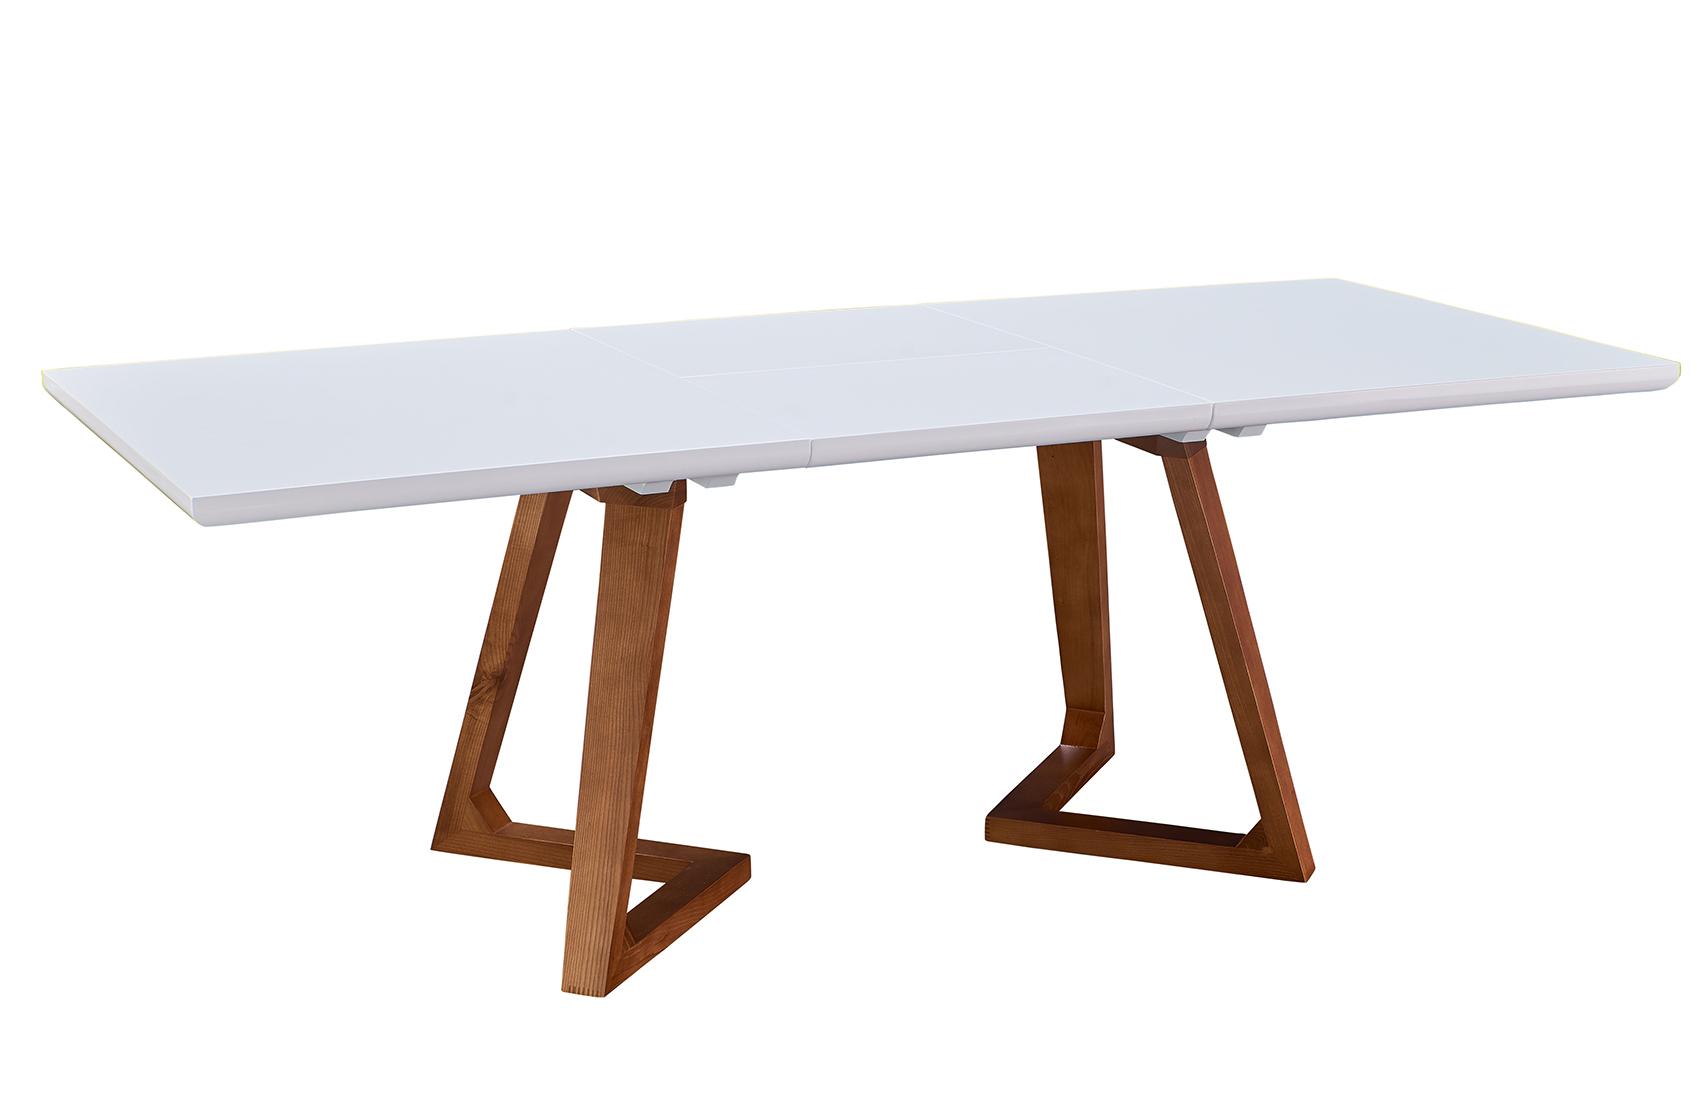 Contemporary, Modern Dining Table 1692DININGTABLE 1692DININGTABLE in Walnut, White 